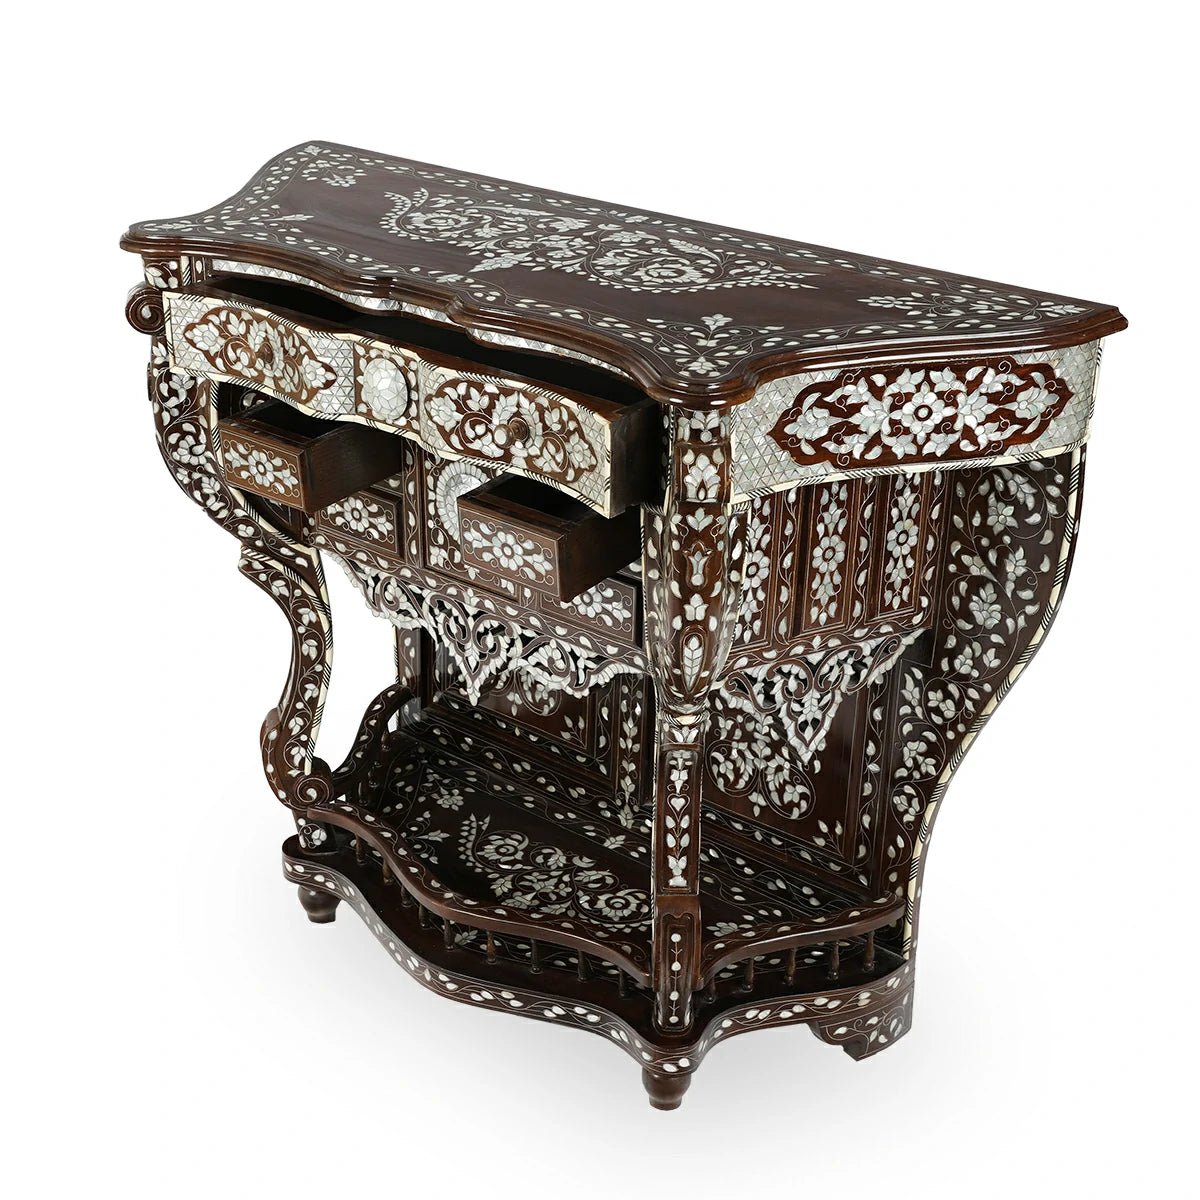 Detailed Side Angled View of Arabic Design Console Table